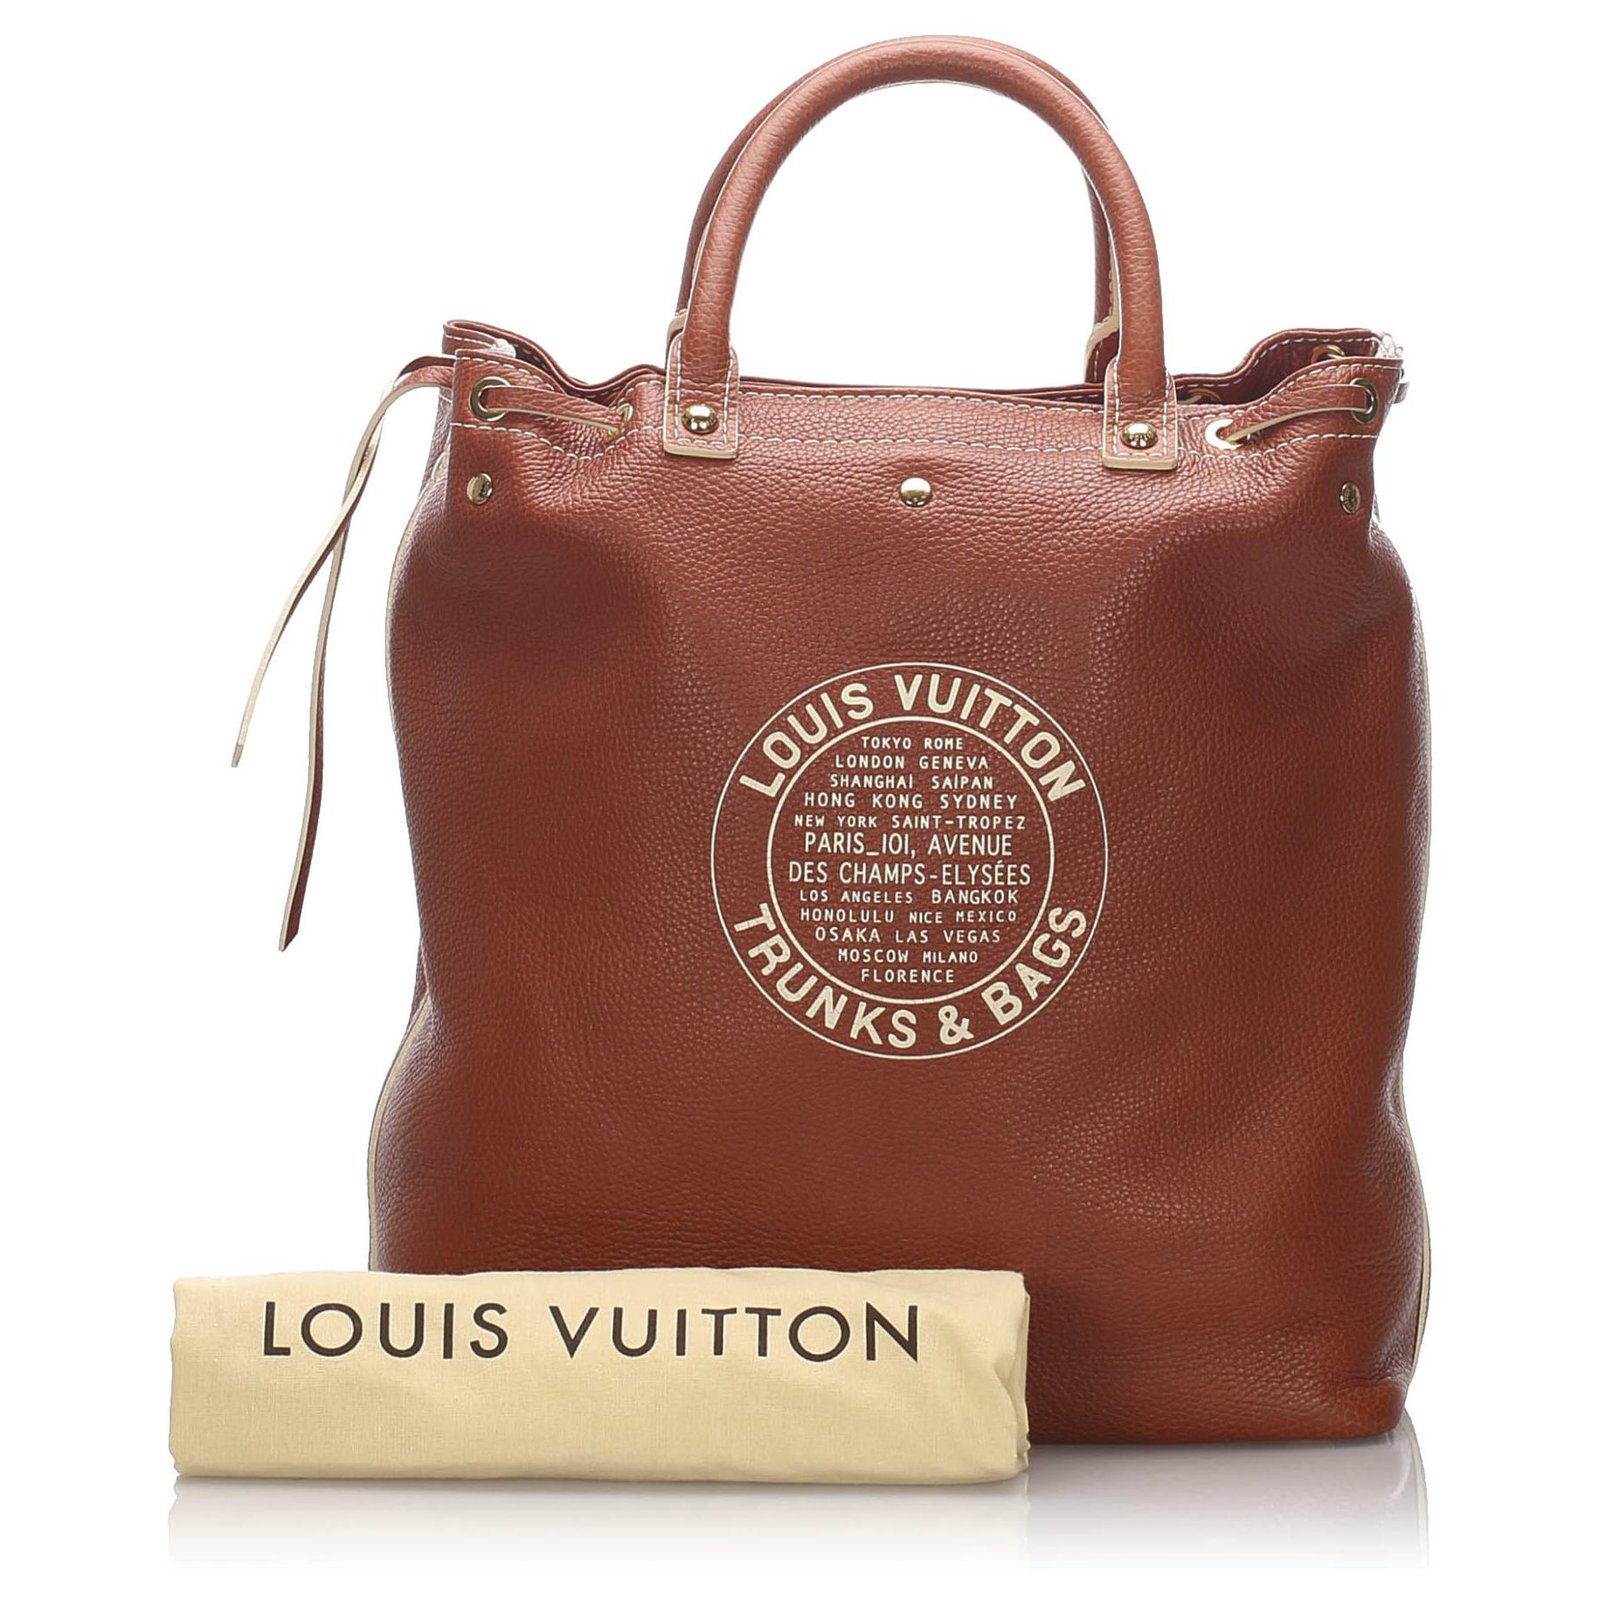 louis vuitton trunks and bags tote